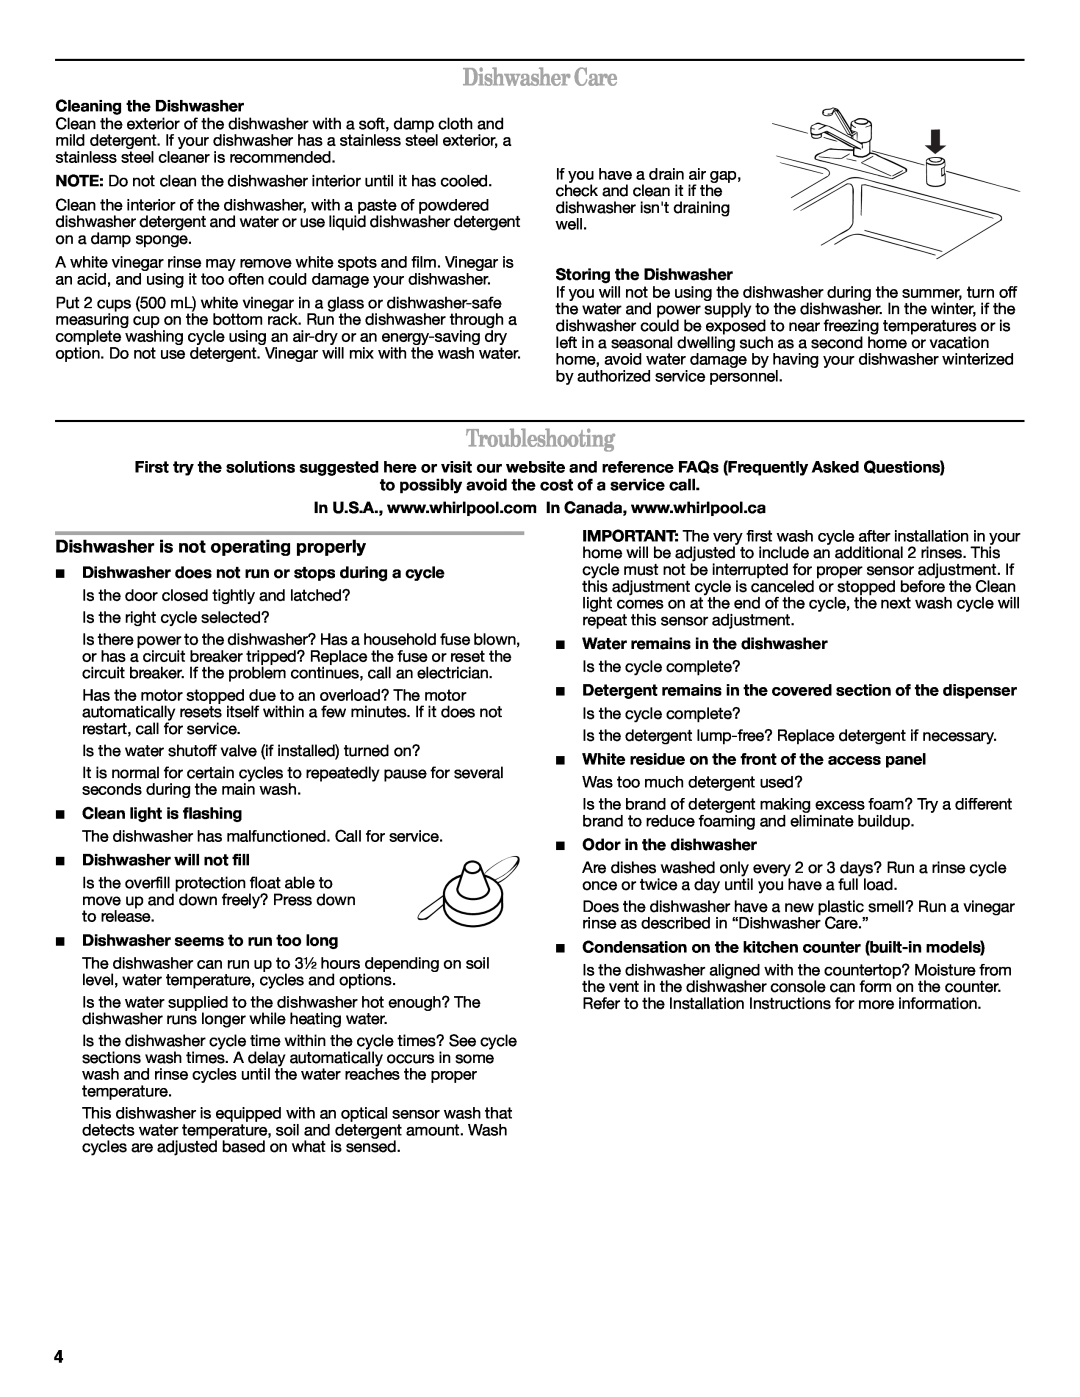 Whirlpool W10130985A important safety instructions Dishwasher Care, Troubleshooting, Dishwasher is not operating properly 